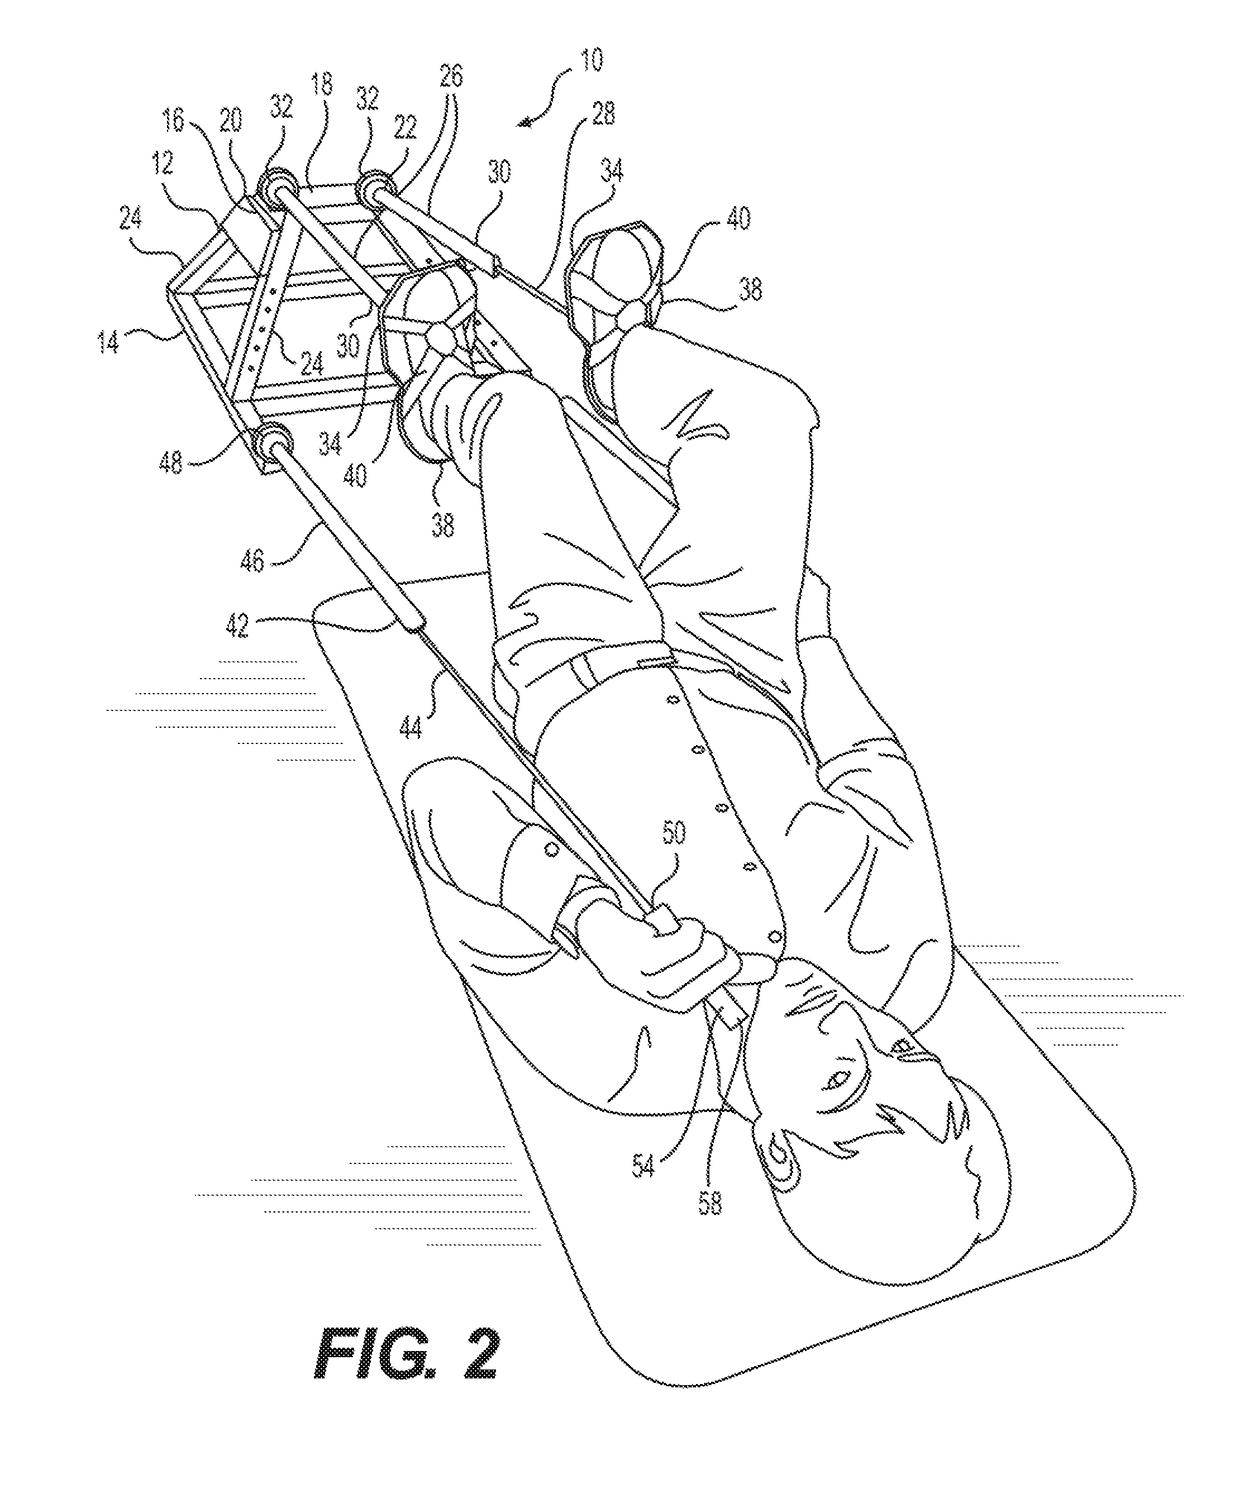 Multi-degree of freedom resistance exercise device